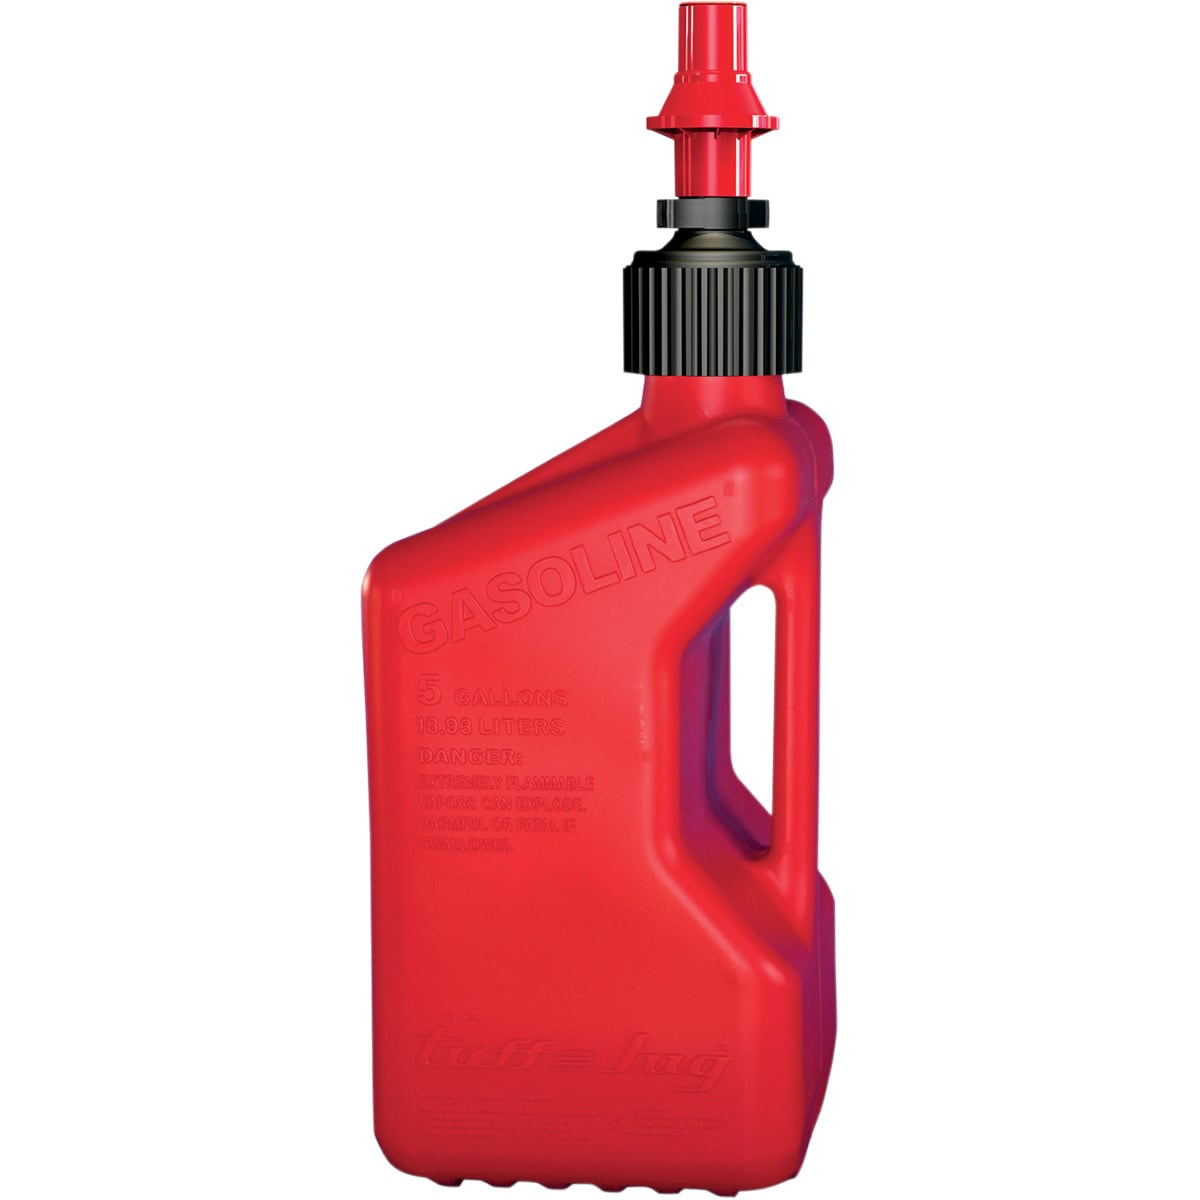 Tuff Jug 10 l fuel container with Quick Fill Nozzle red